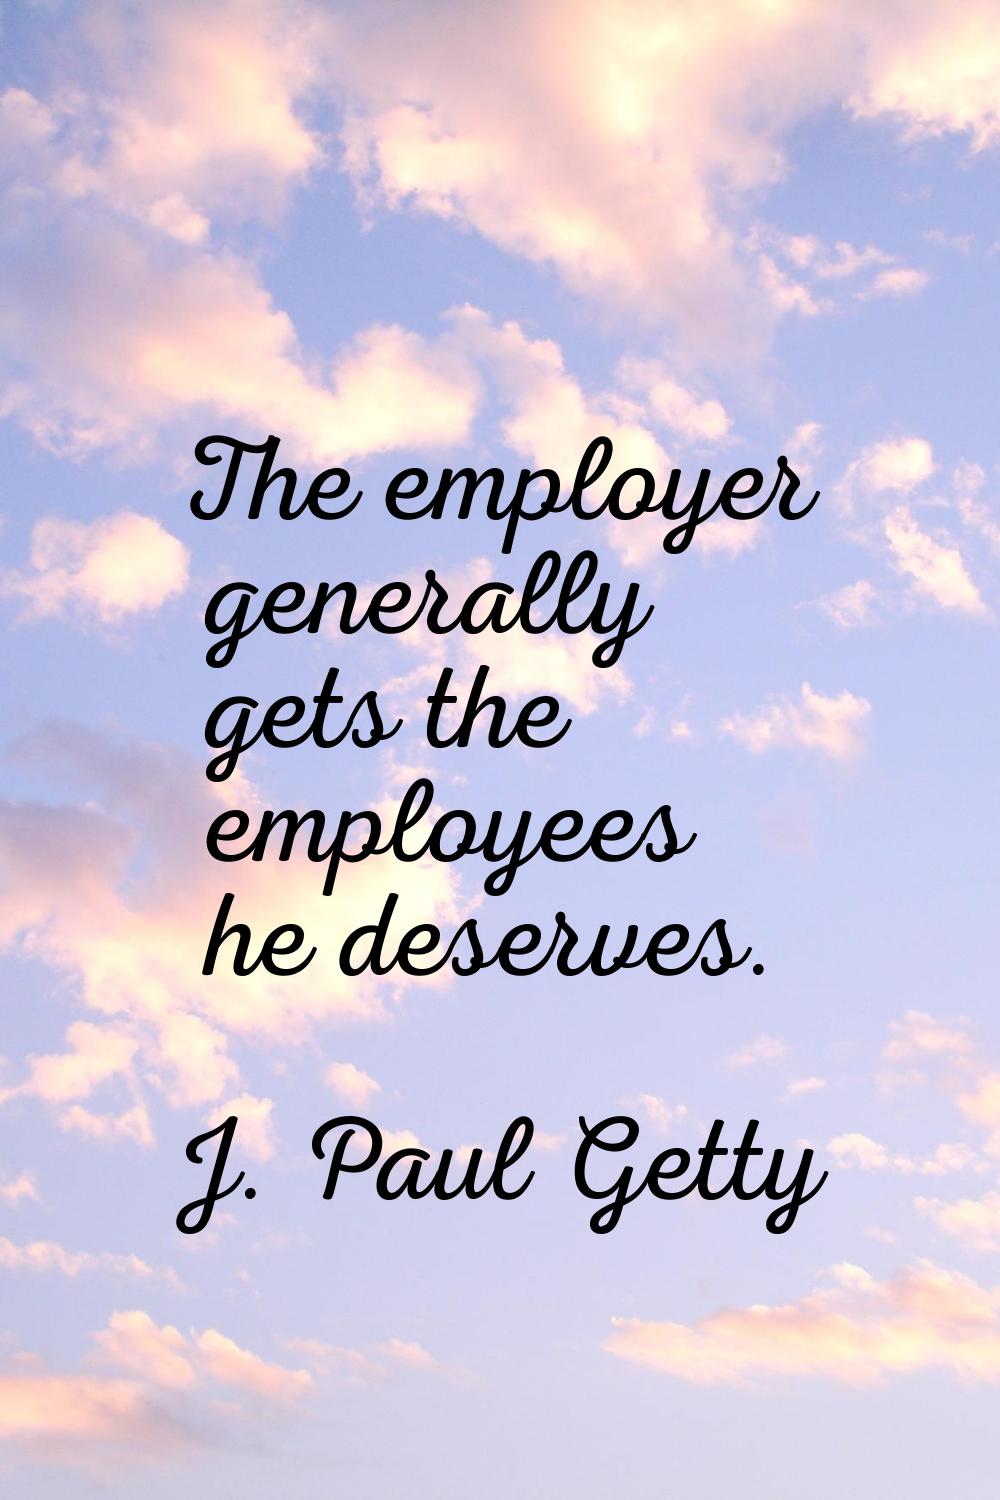 The employer generally gets the employees he deserves.